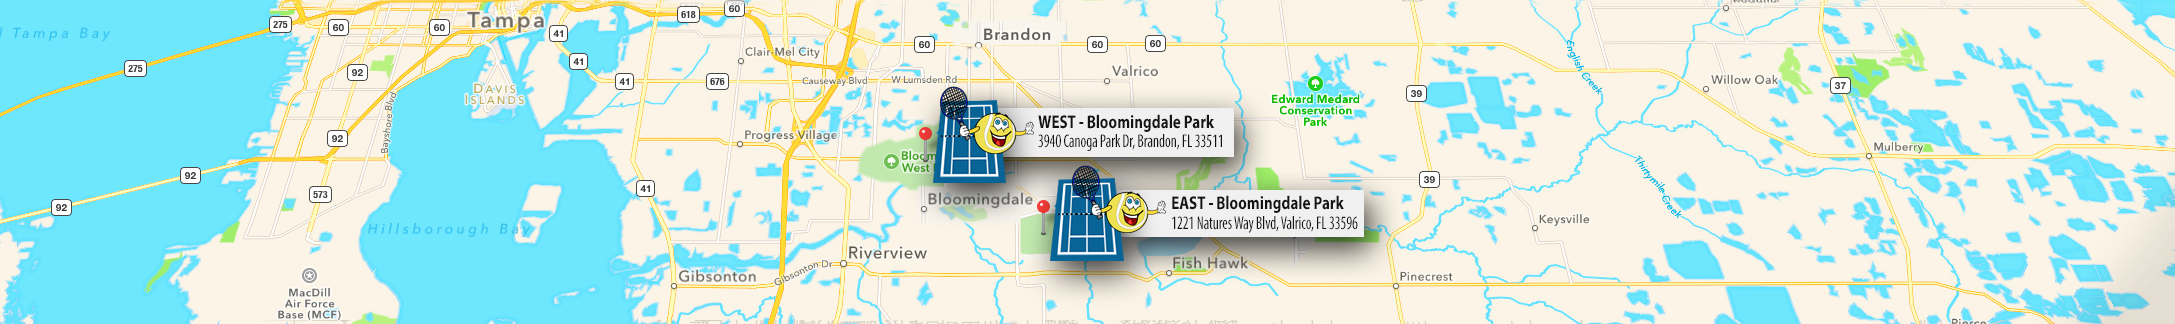 Image Map of Bloomingdale locations